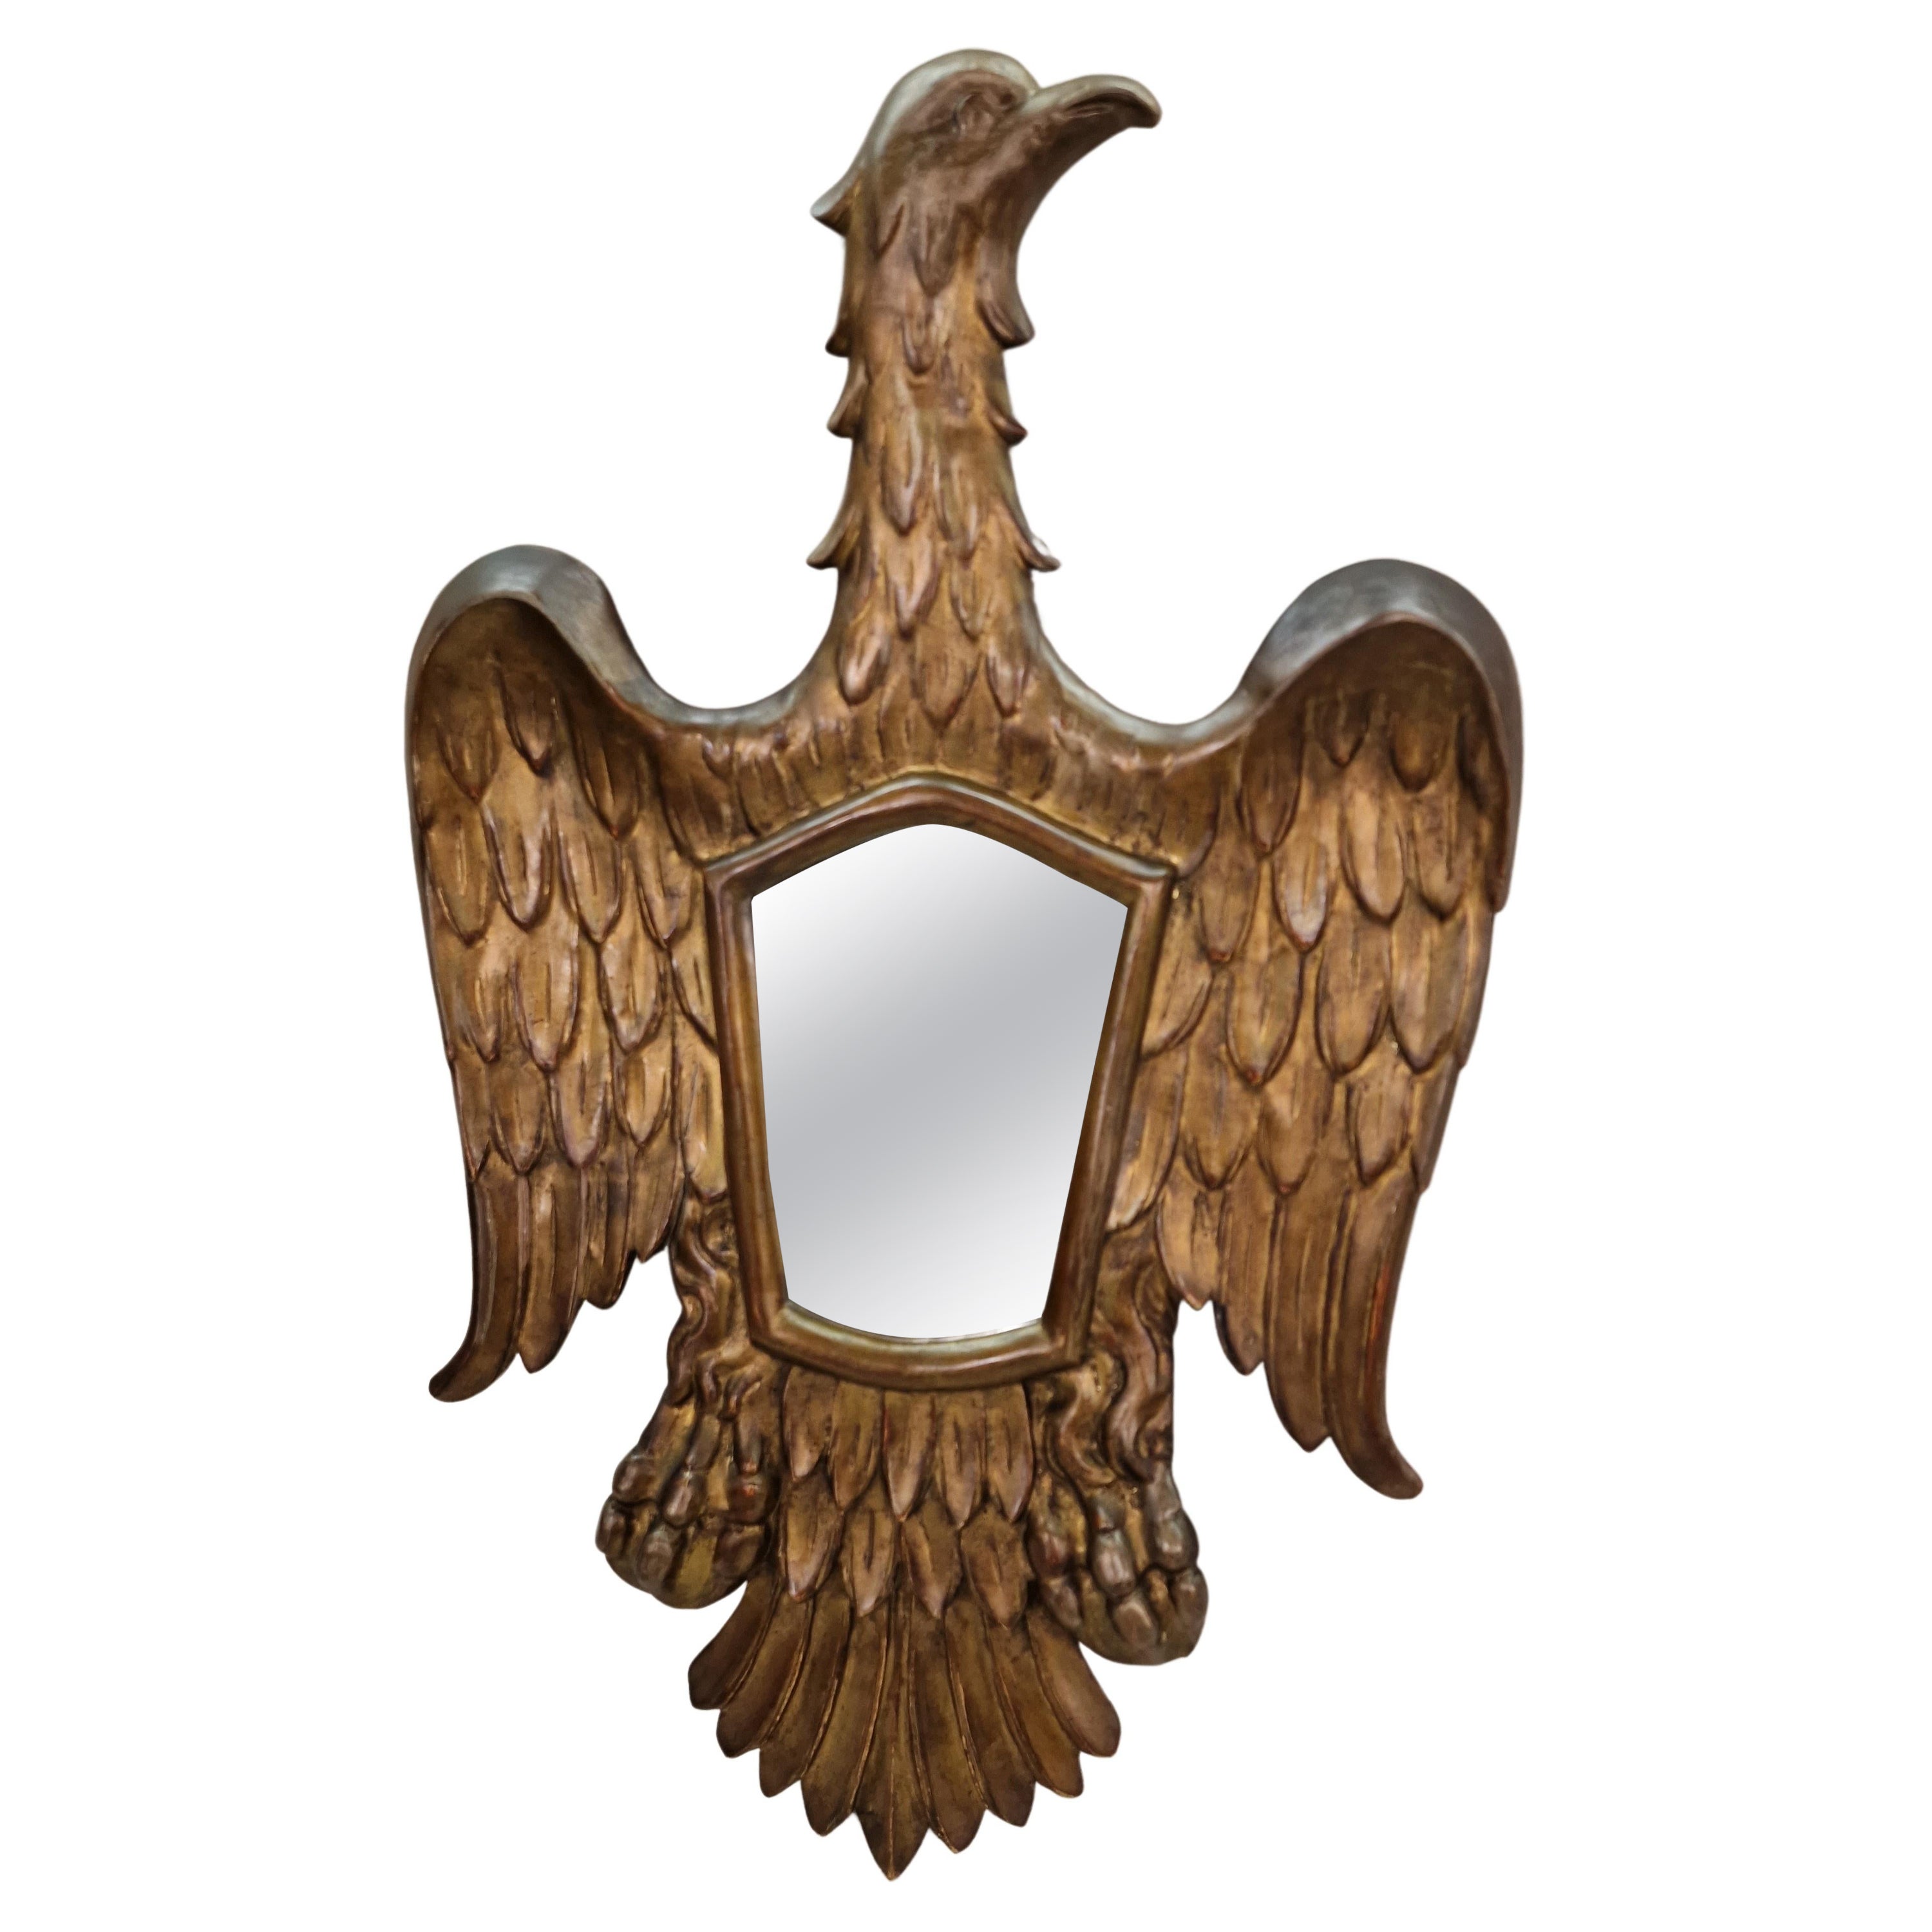 Huge Wall Mirror, Eagle, Figural, End 19th Century, Central Europe For Sale